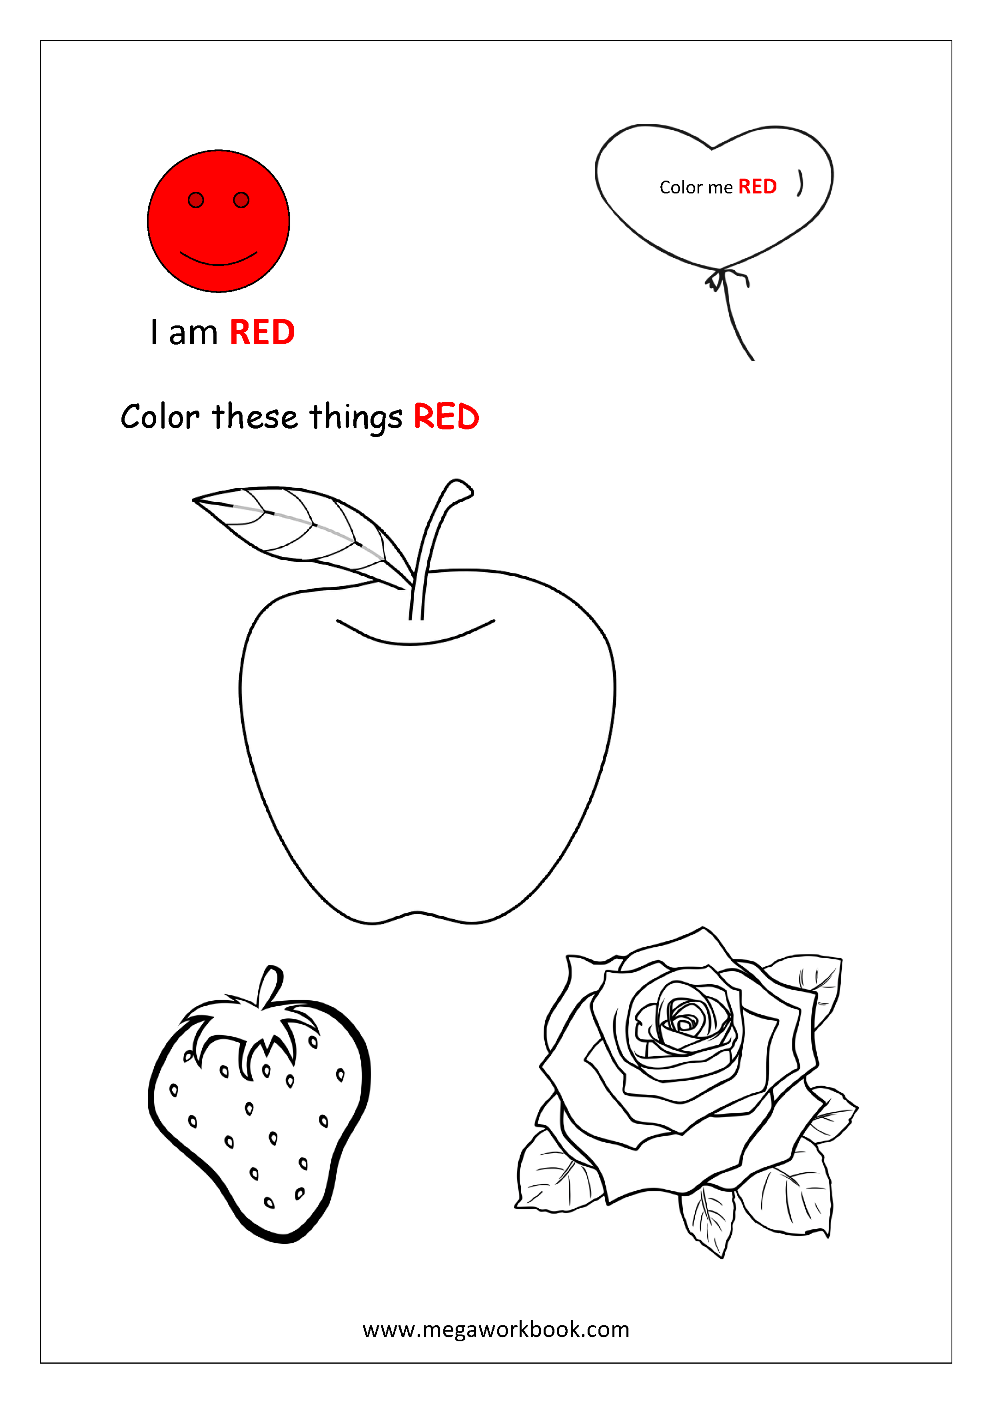 Red's Colour Things, Kids Learn Colours, color blocks red